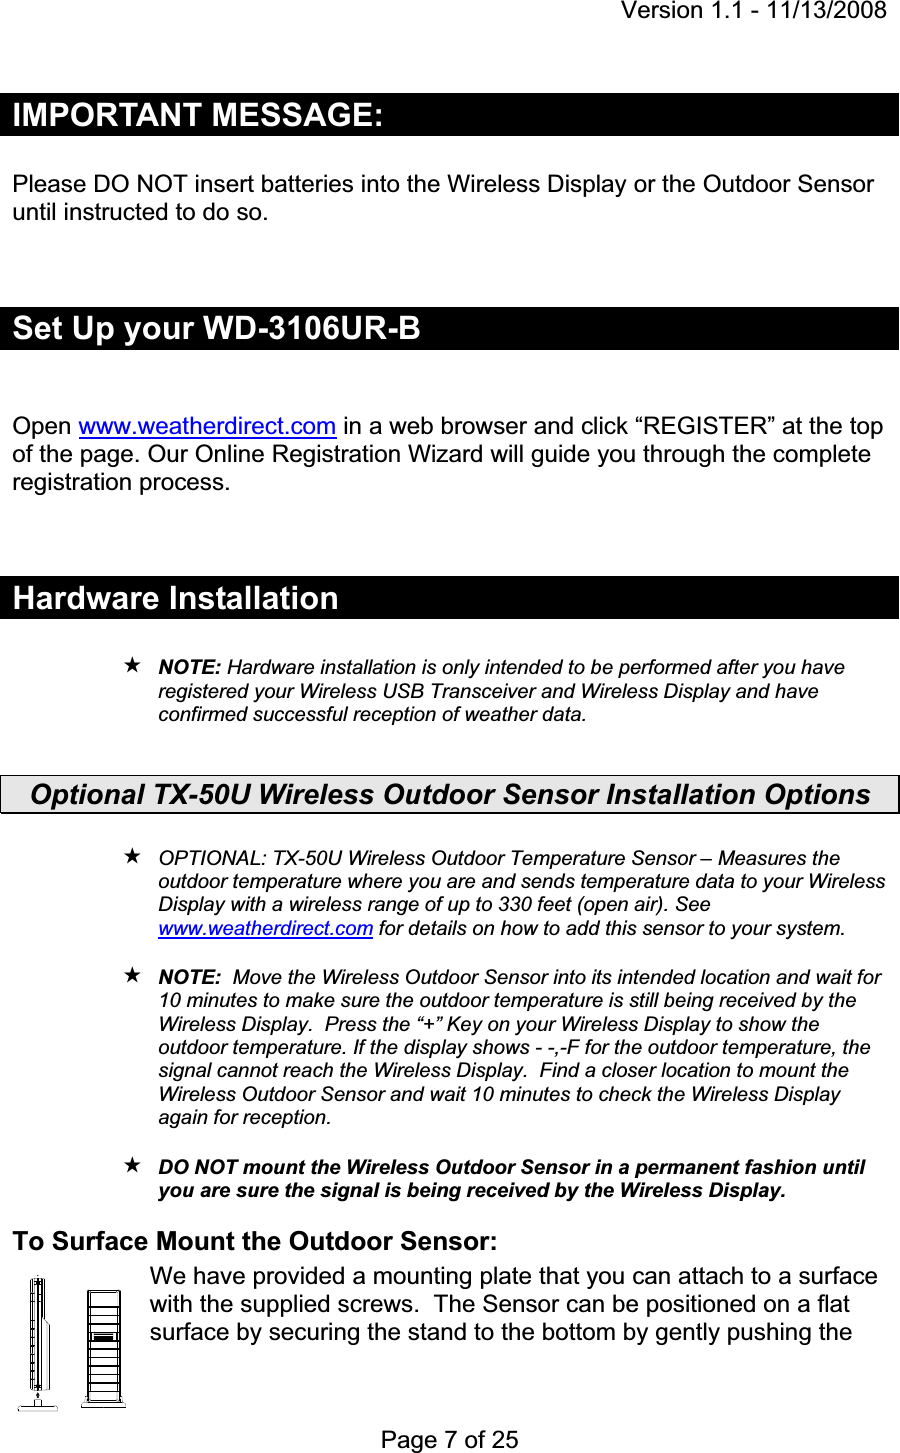 Version 1.1 - 11/13/2008 Page 7 of 25 IMPORTANT MESSAGE: Please DO NOT insert batteries into the Wireless Display or the Outdoor Sensor until instructed to do so.Set Up your WD-3106UR-BOpen www.weatherdirect.com in a web browser and click “REGISTER” at the top of the page. Our Online Registration Wizard will guide you through the complete registration process. Hardware Installation NOTE: Hardware installation is only intended to be performed after you have registered your Wireless USB Transceiver and Wireless Display and have confirmed successful reception of weather data.  Optional TX-50U Wireless Outdoor Sensor Installation Options OPTIONAL: TX-50U Wireless Outdoor Temperature Sensor – Measures the outdoor temperature where you are and sends temperature data to your Wireless Display with a wireless range of up to 330 feet (open air). See www.weatherdirect.com for details on how to add this sensor to your system. NOTE:  Move the Wireless Outdoor Sensor into its intended location and wait for 10 minutes to make sure the outdoor temperature is still being received by the Wireless Display.  Press the “+” Key on your Wireless Display to show the outdoor temperature. If the display shows - -,-F for the outdoor temperature, the signal cannot reach the Wireless Display.  Find a closer location to mount the Wireless Outdoor Sensor and wait 10 minutes to check the Wireless Display again for reception.DO NOT mount the Wireless Outdoor Sensor in a permanent fashion until you are sure the signal is being received by the Wireless Display. To Surface Mount the Outdoor Sensor: We have provided a mounting plate that you can attach to a surface with the supplied screws.  The Sensor can be positioned on a flat surface by securing the stand to the bottom by gently pushing the 